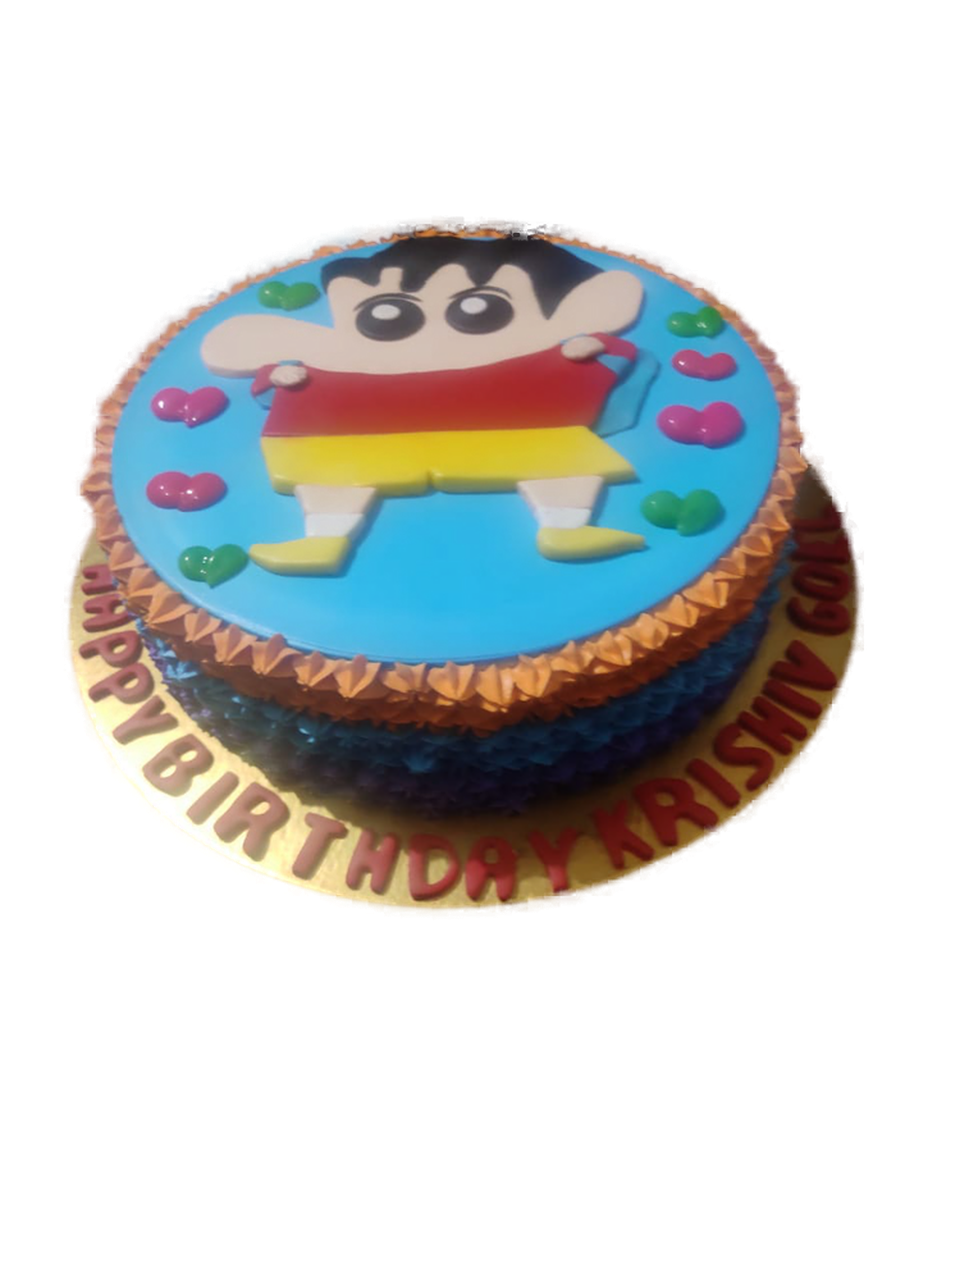 Different Cakes for Different Occasion with same day Cake Delivery in  Bangalore | IndianGiftsAdda.com Blog